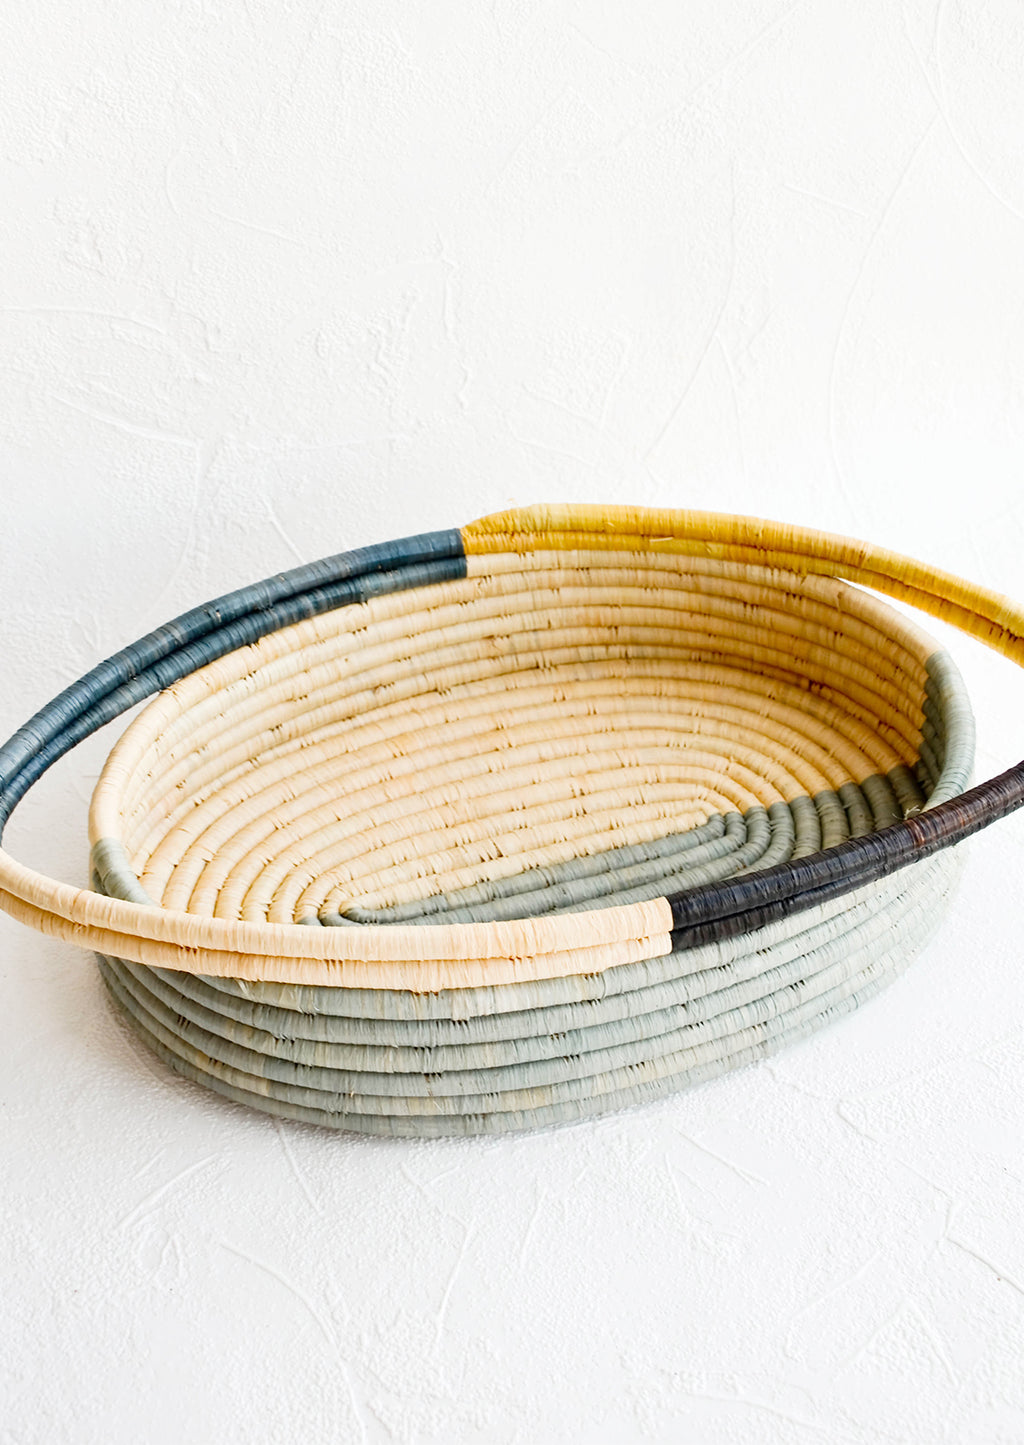 1: Oval bread basket in woven raffia with protruding handles at either side. Blue and yellow colorblock pattern.